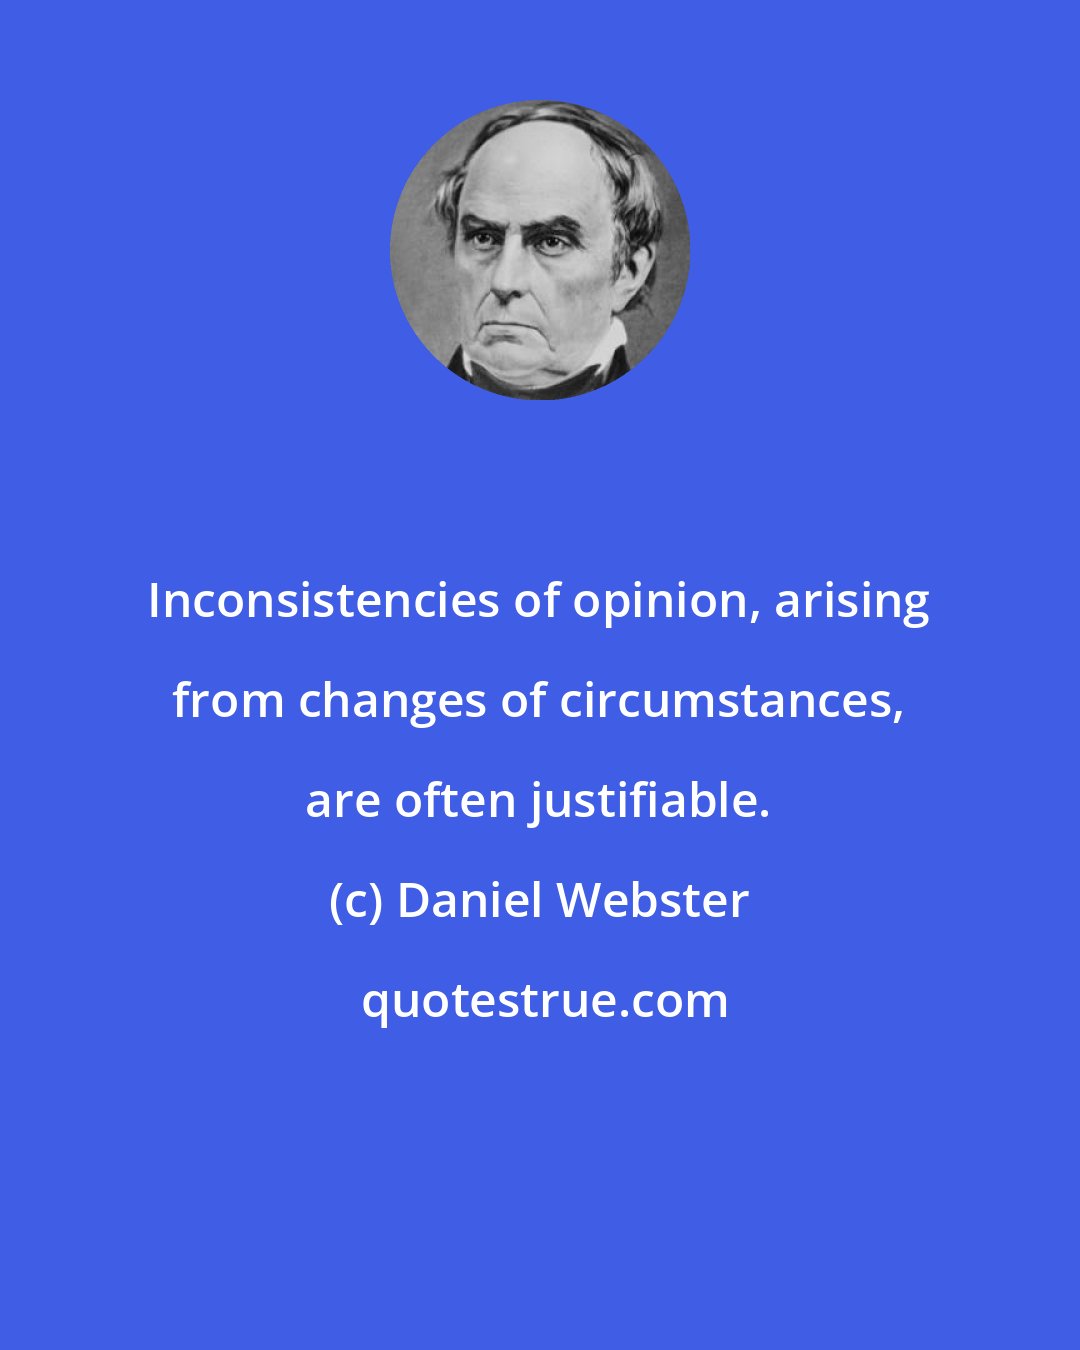 Daniel Webster: Inconsistencies of opinion, arising from changes of circumstances, are often justifiable.